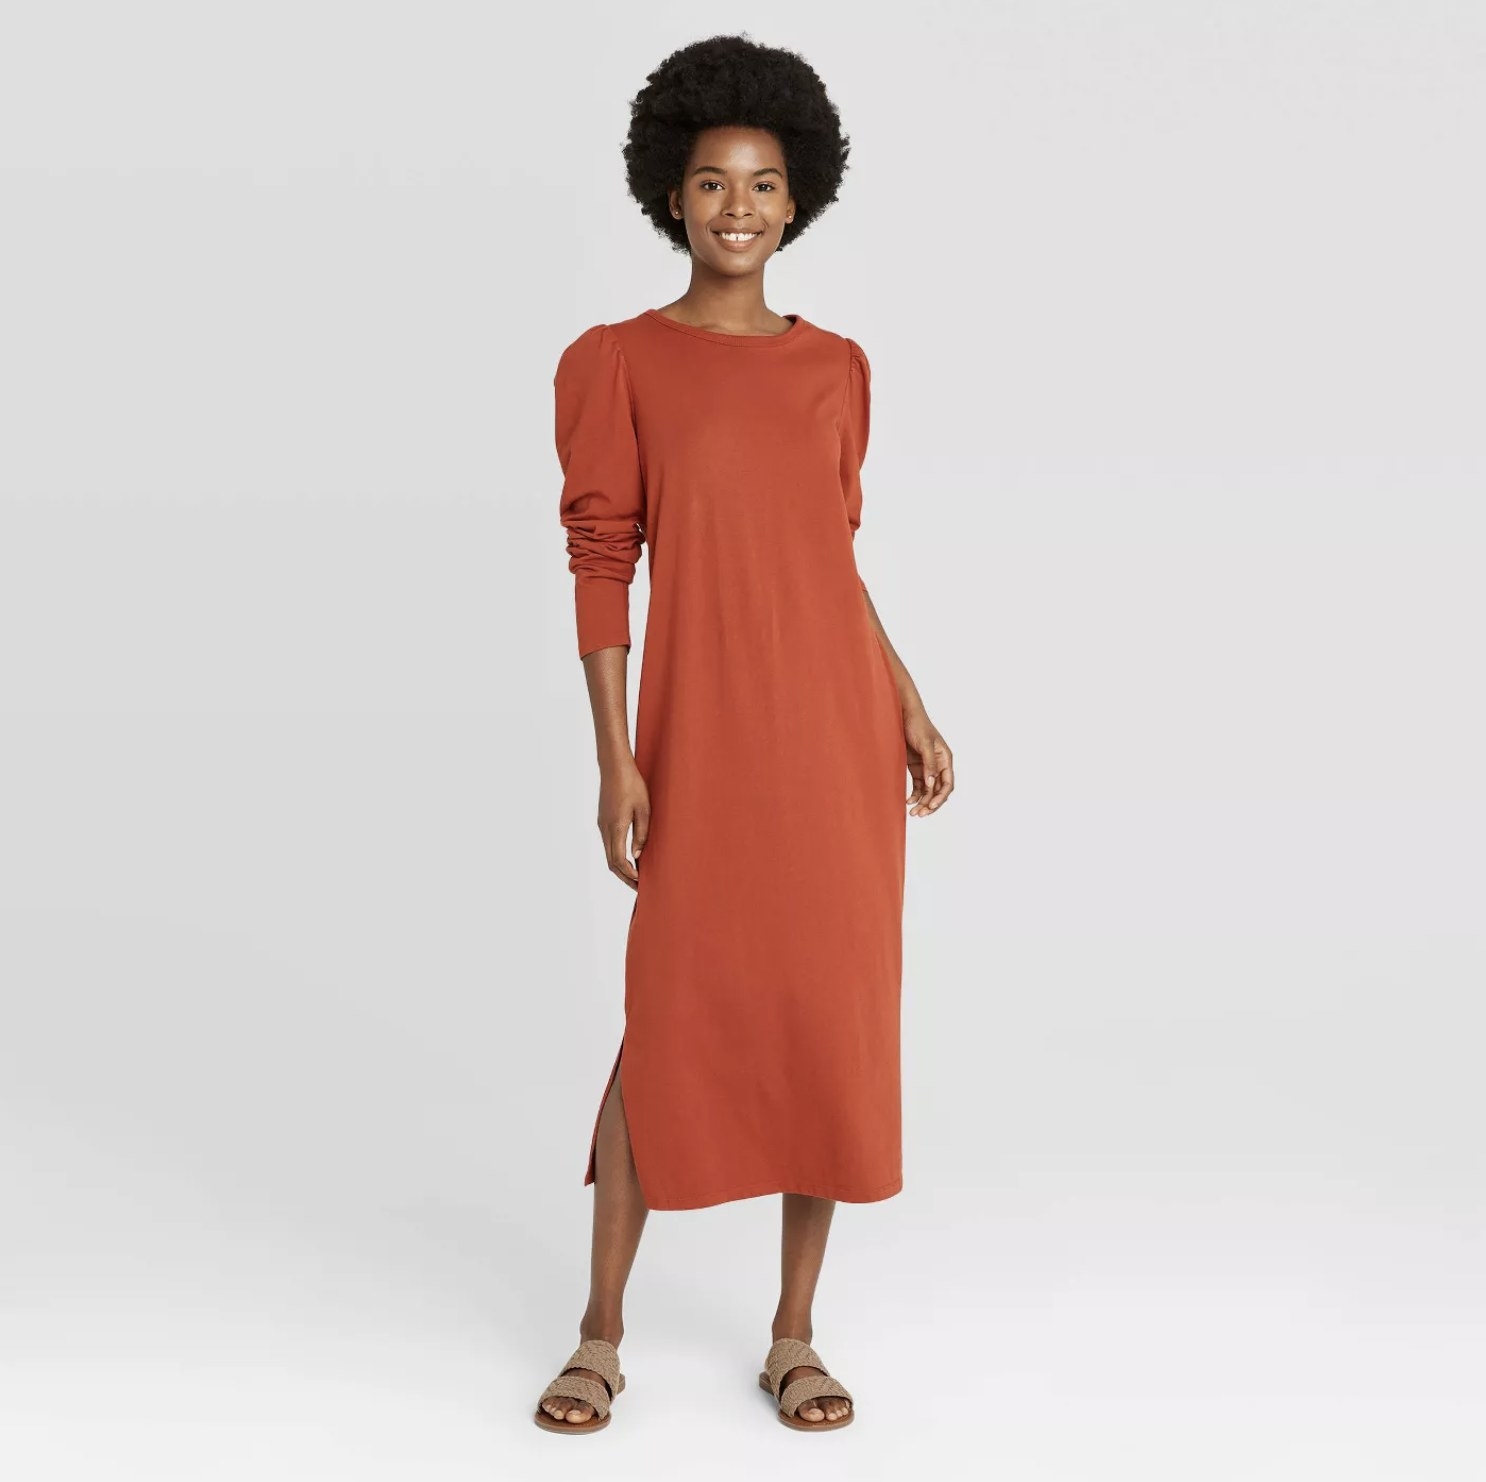 Model is wearing a rust orange long sleeve midi dress with puffed sleeves and tan slides